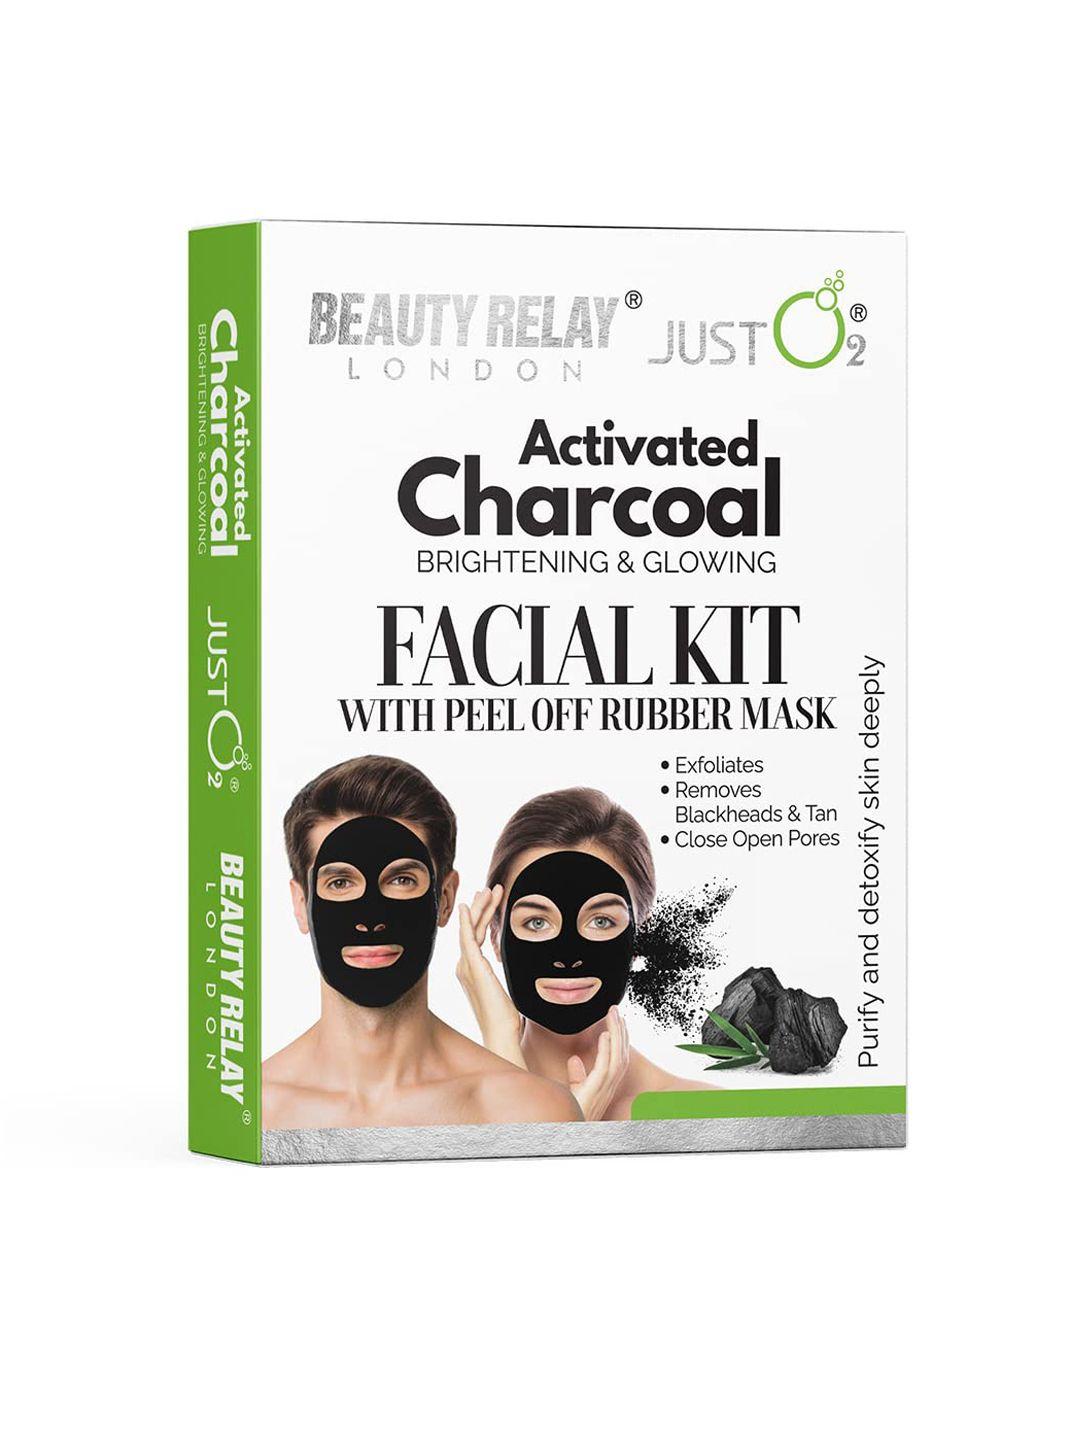 beautyrelay-london-activated-charcoal-facial-kit-with-peel-off-rubber-mask-59g